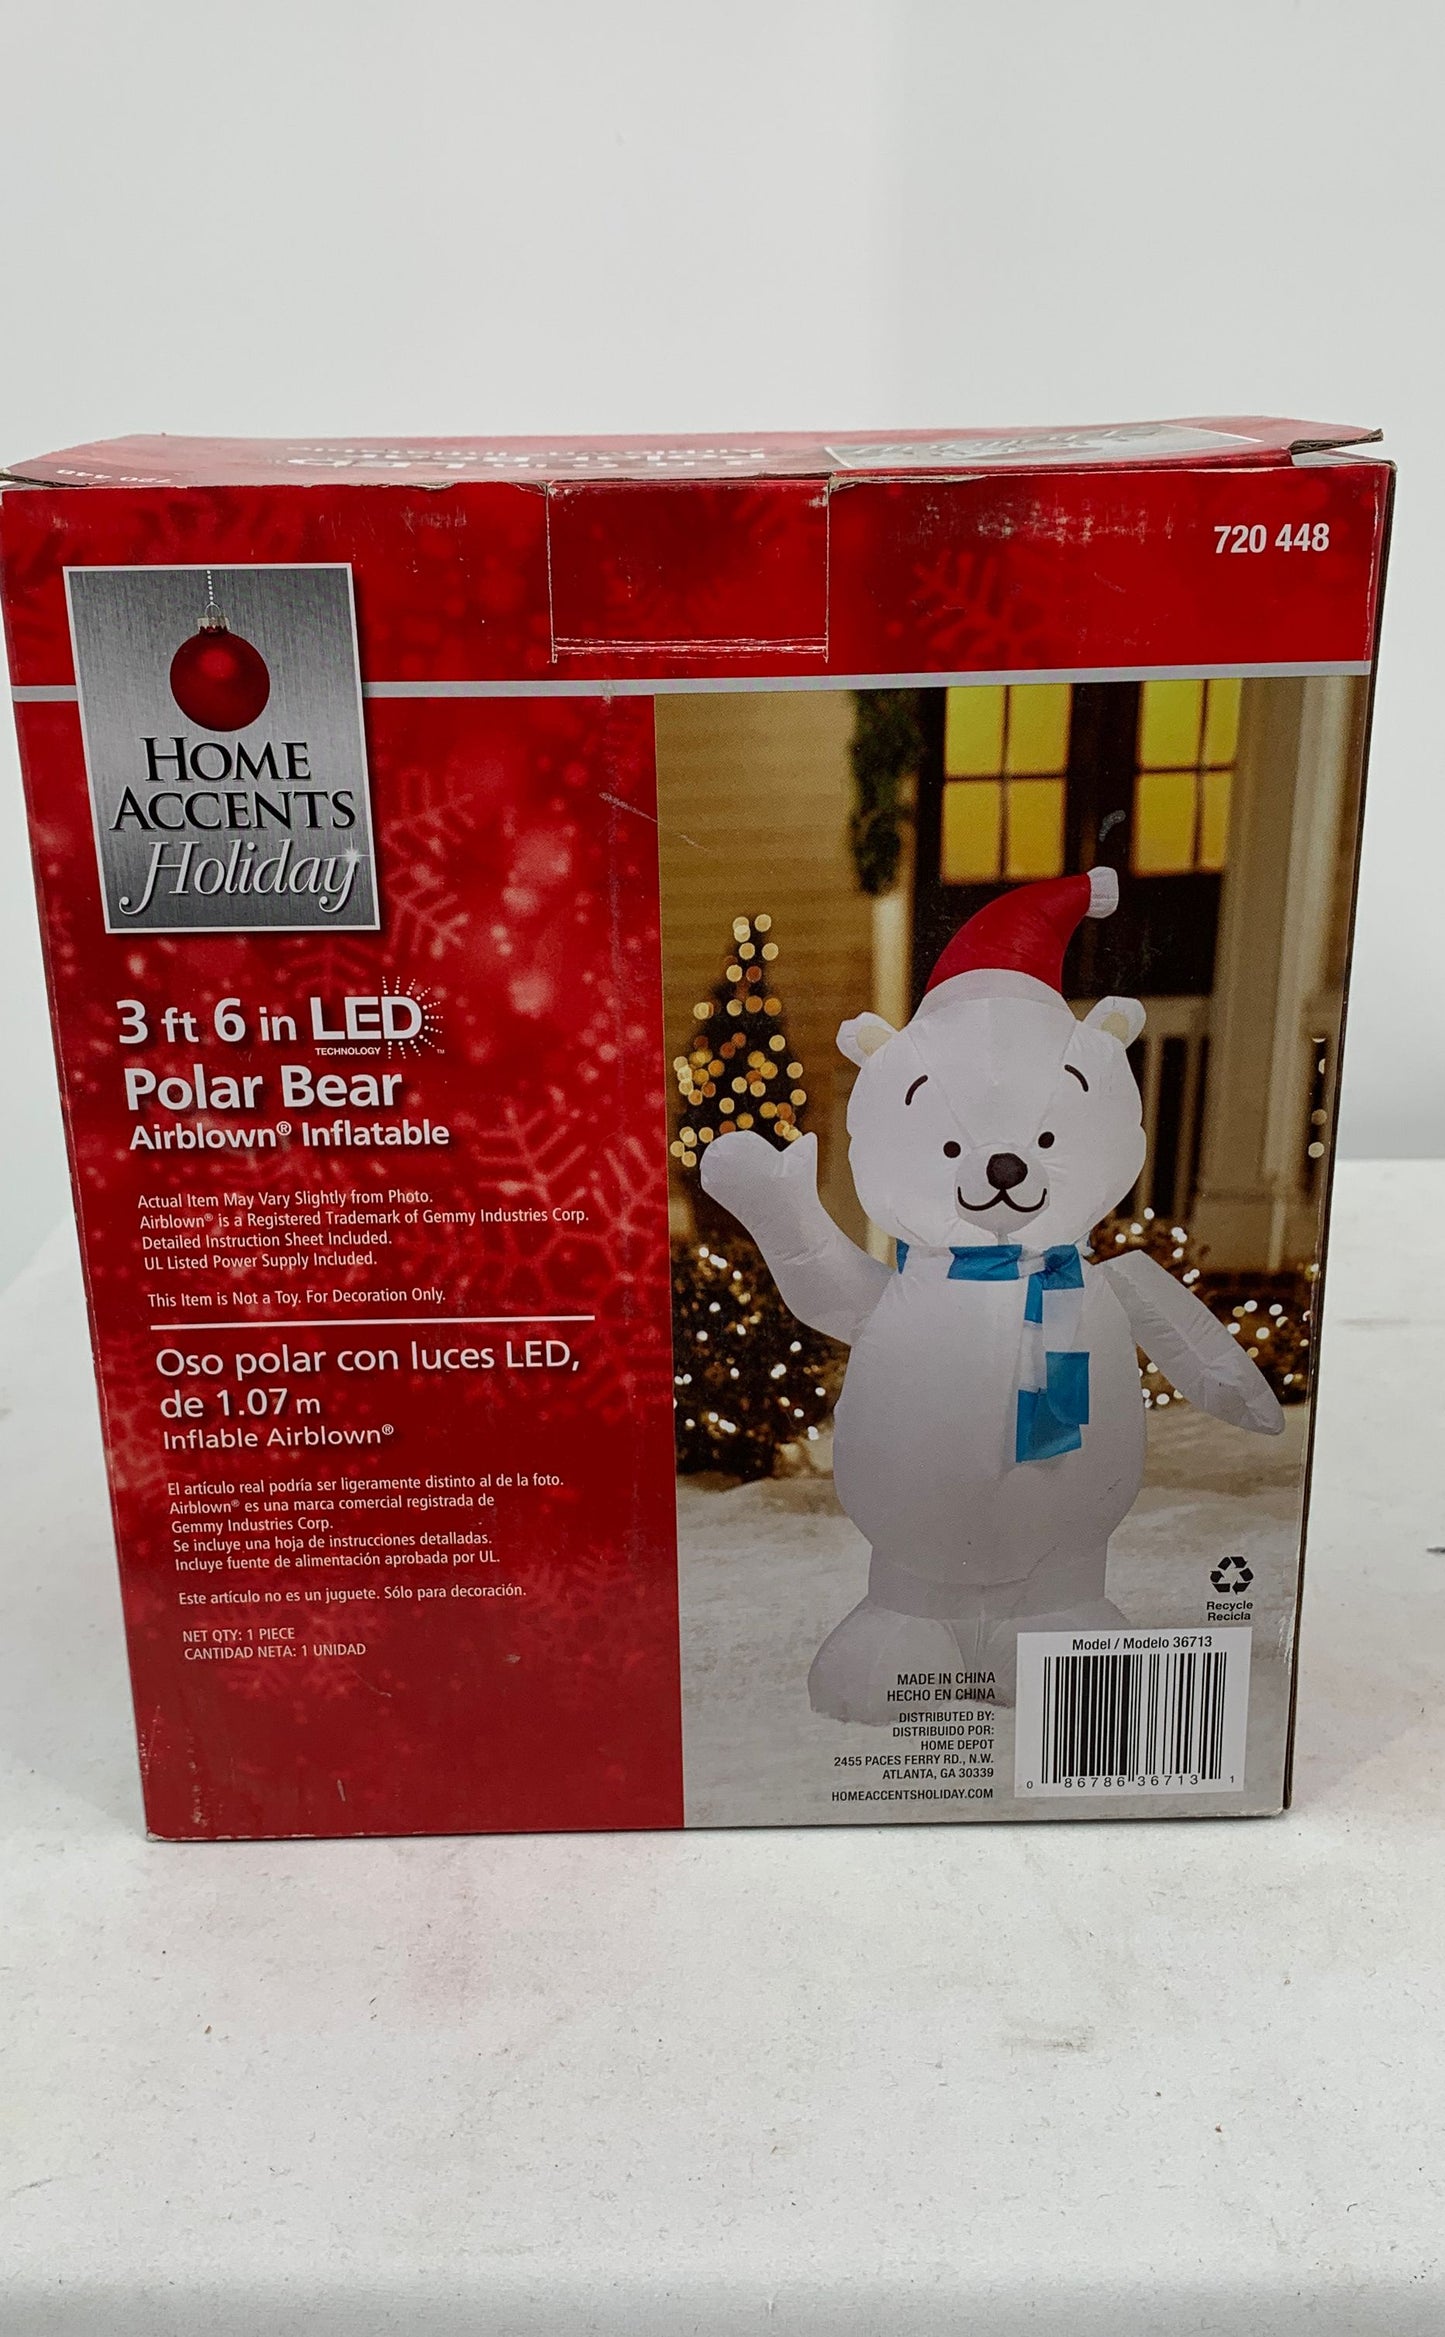 Home Accents Holiday 3' 6" In LED Polar Bear Airblown Inflatable